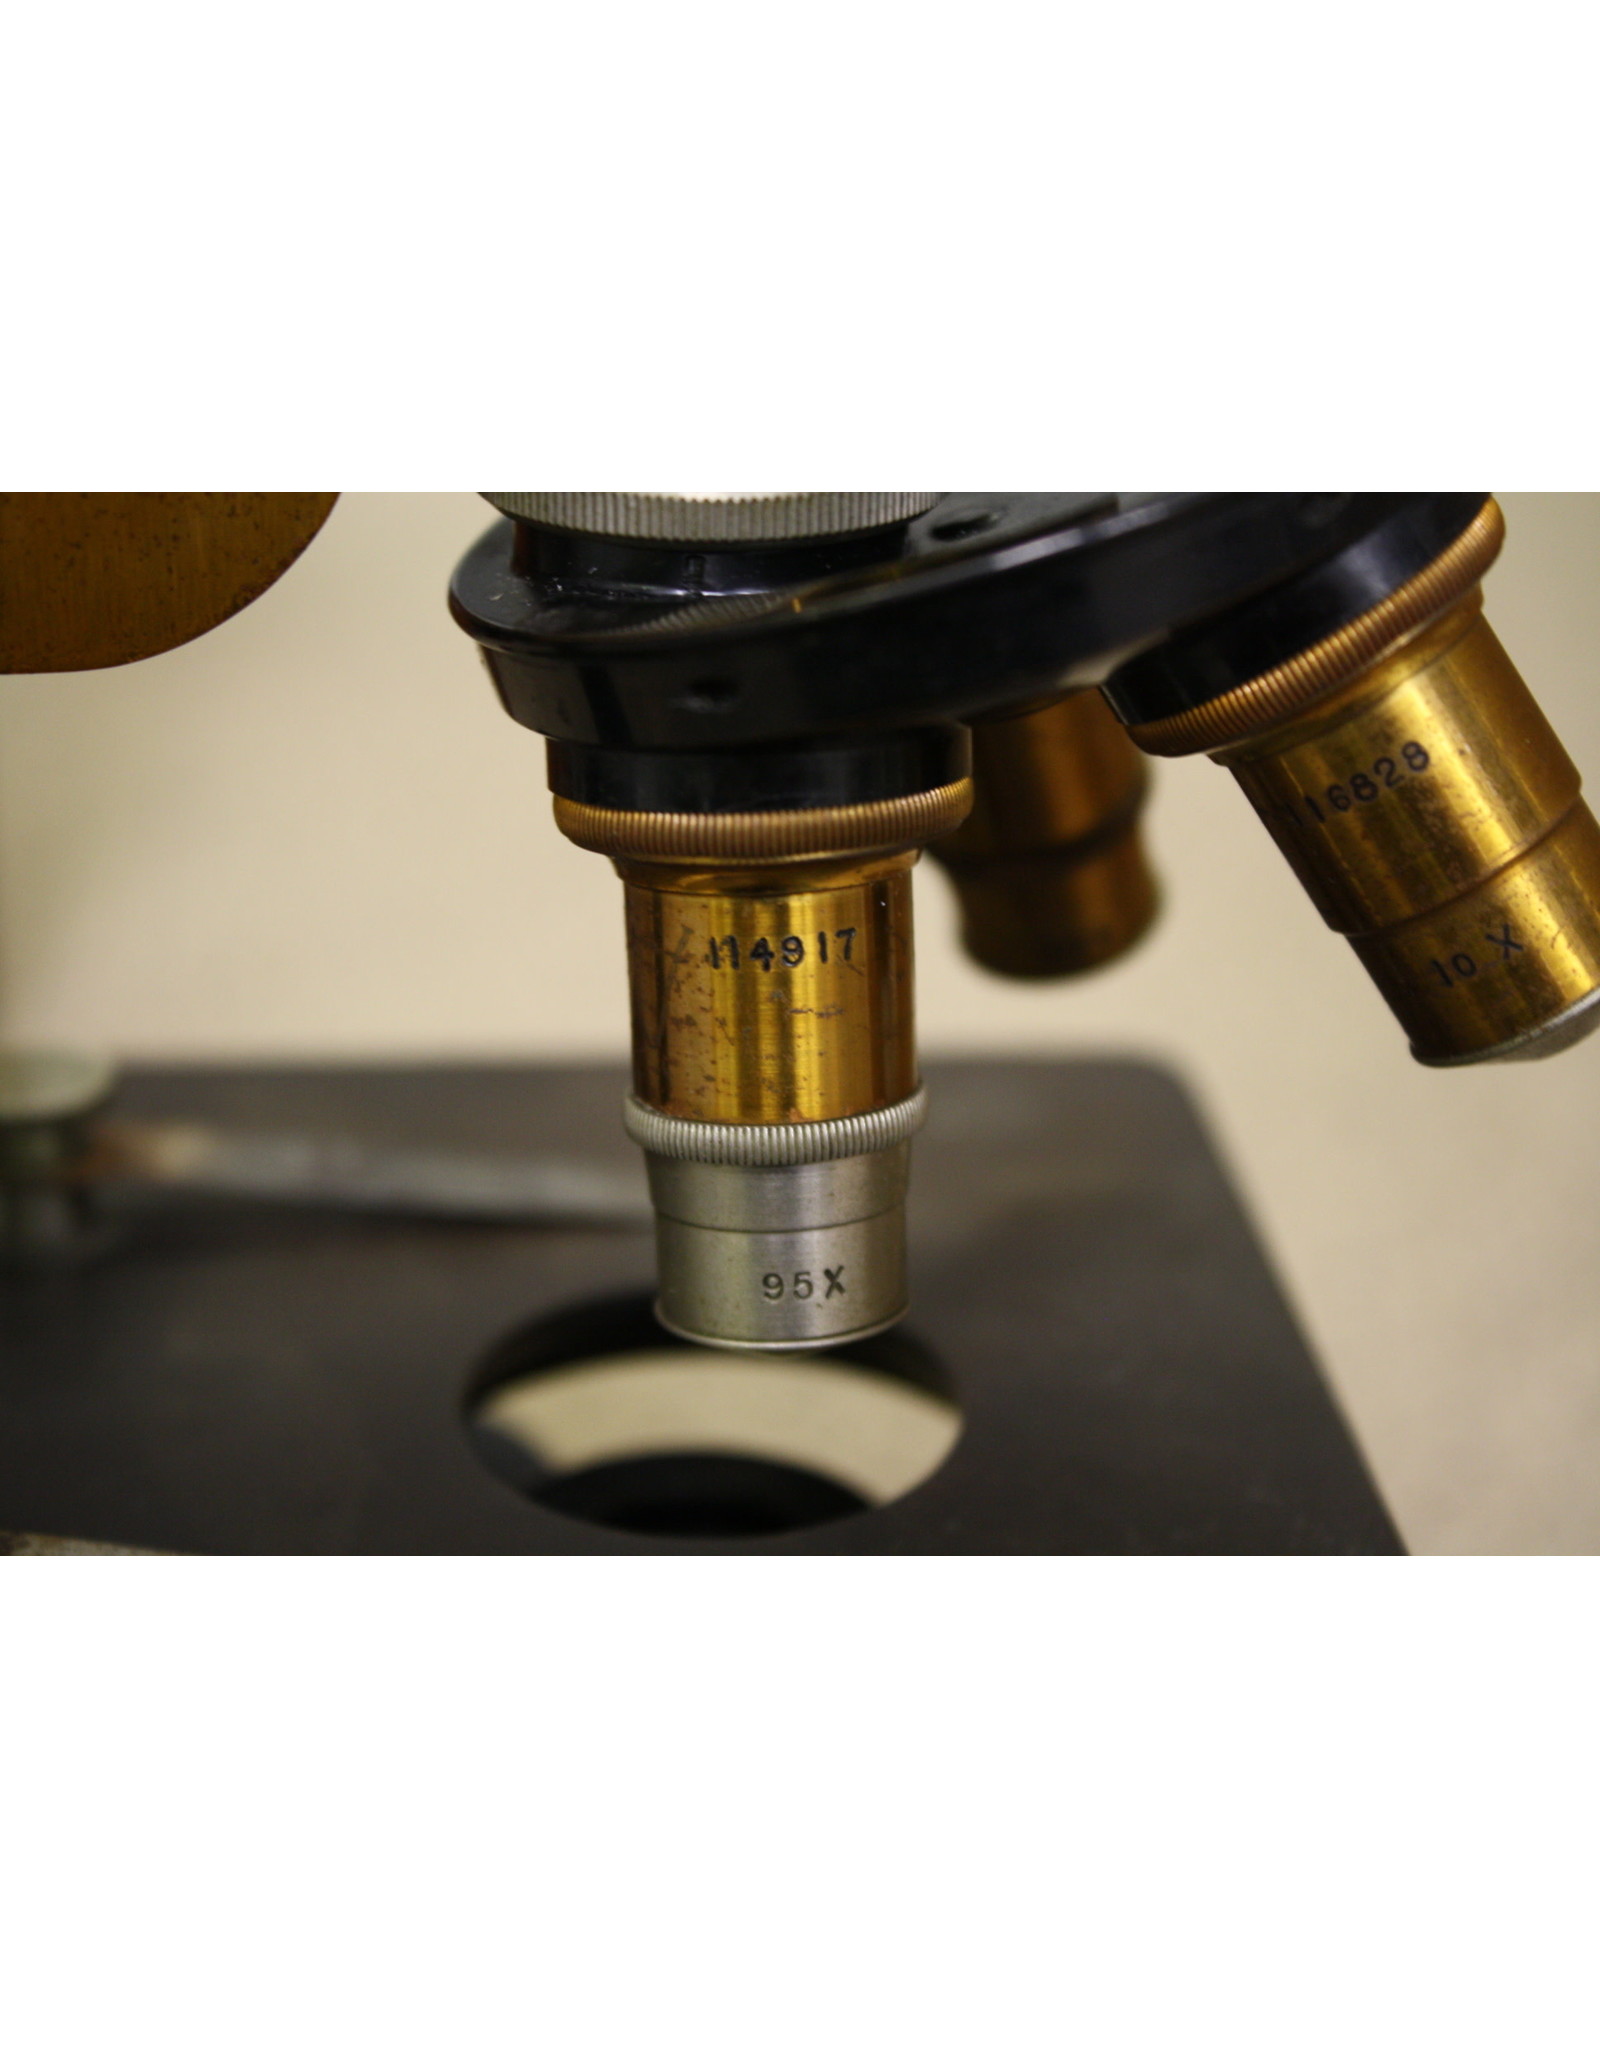 Spencer Brass Microscope In wooden Case (Pre-owned)